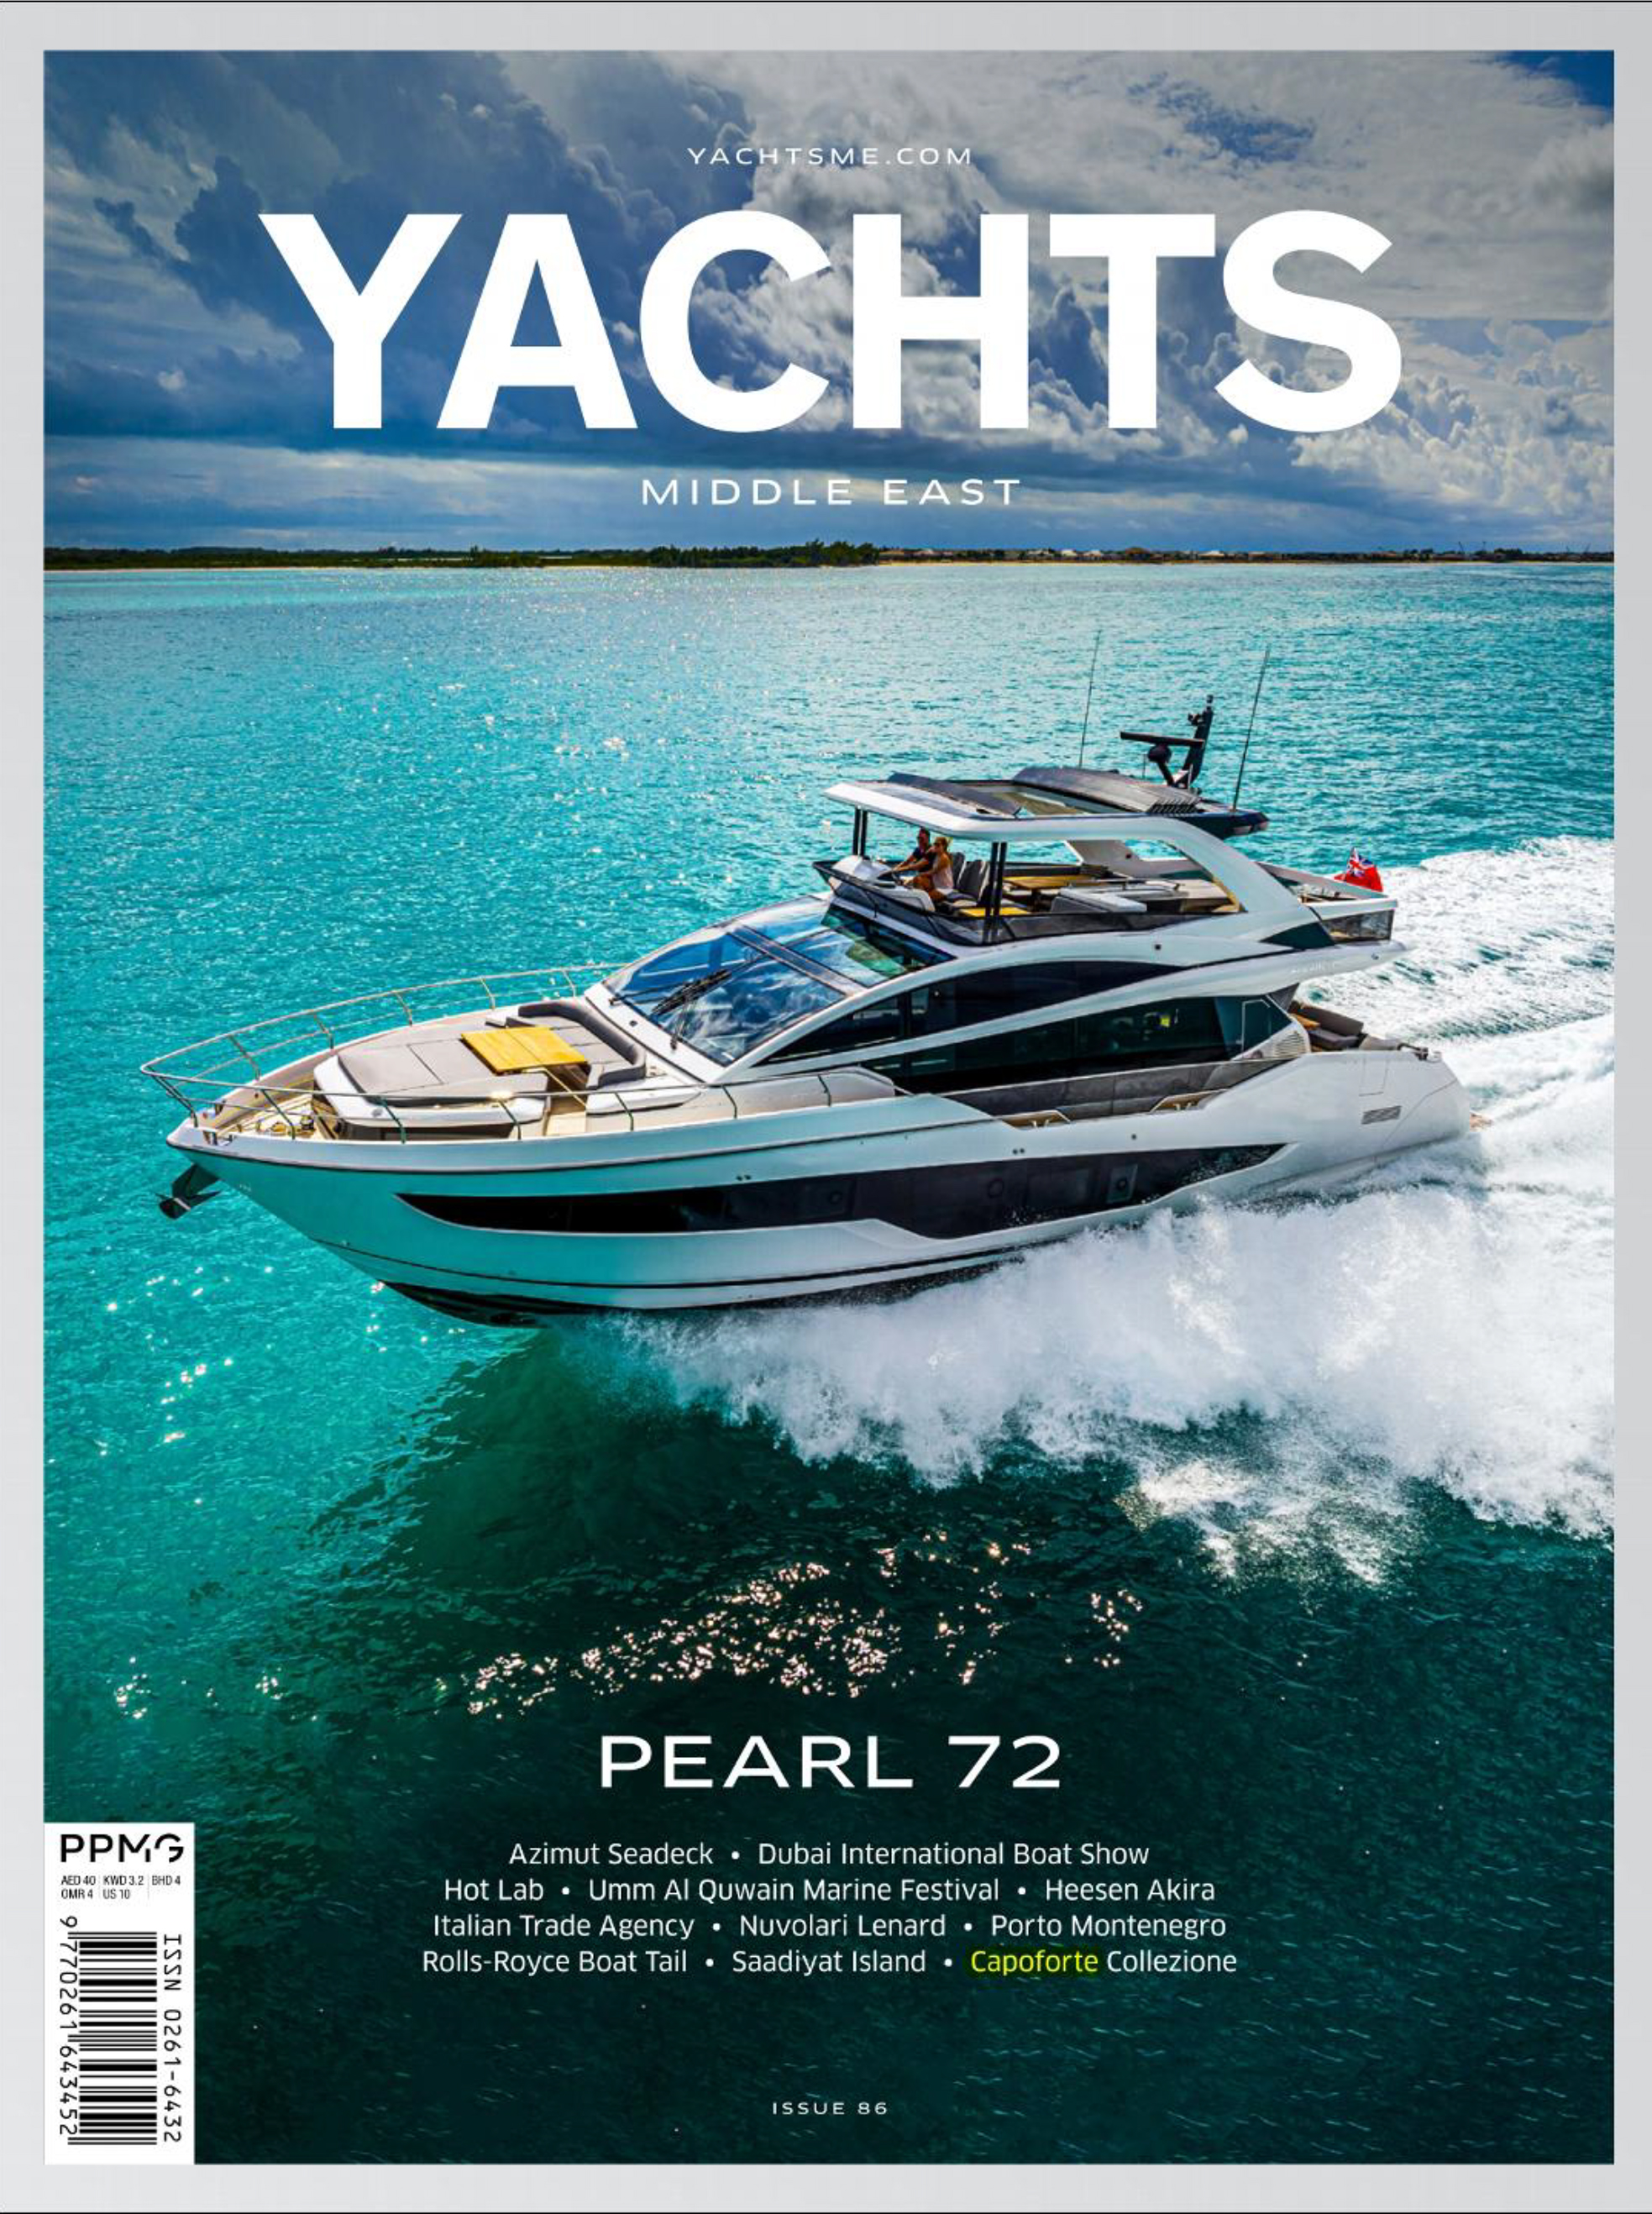 Yachts Middle East, Issue 86